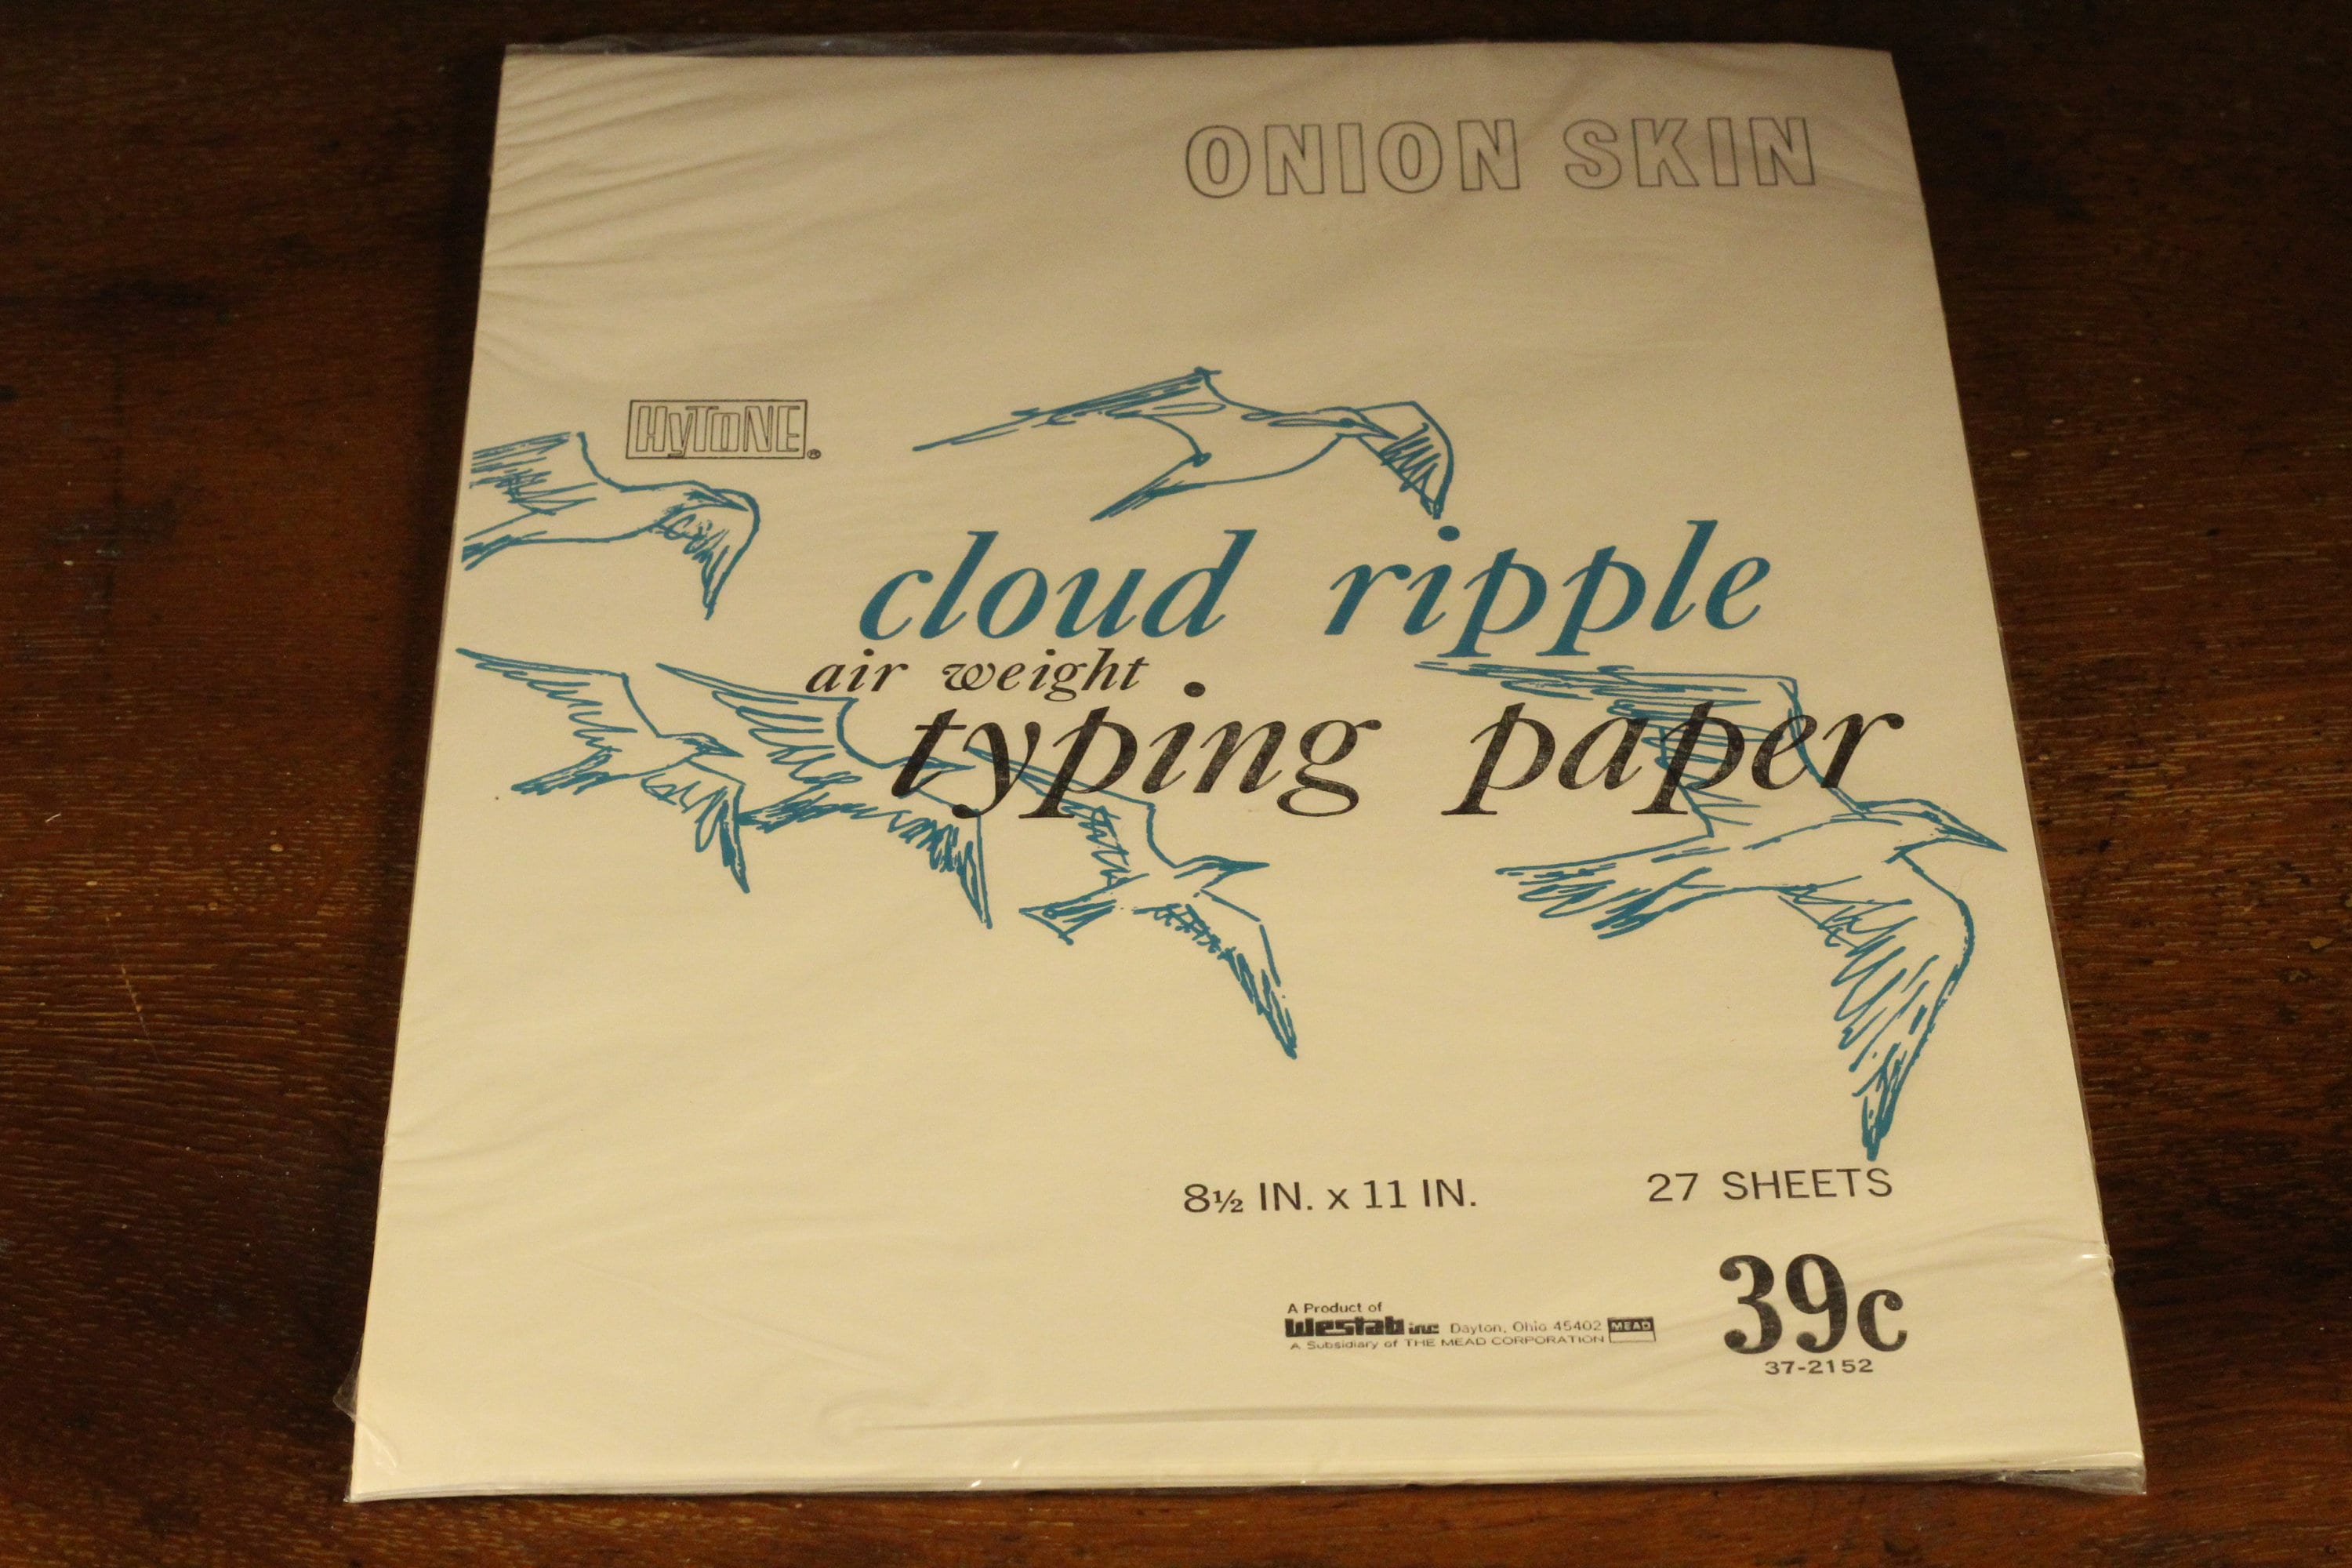 Tracing Paper Pad A4 8.3inch X 11.7inch 24 Sheets 